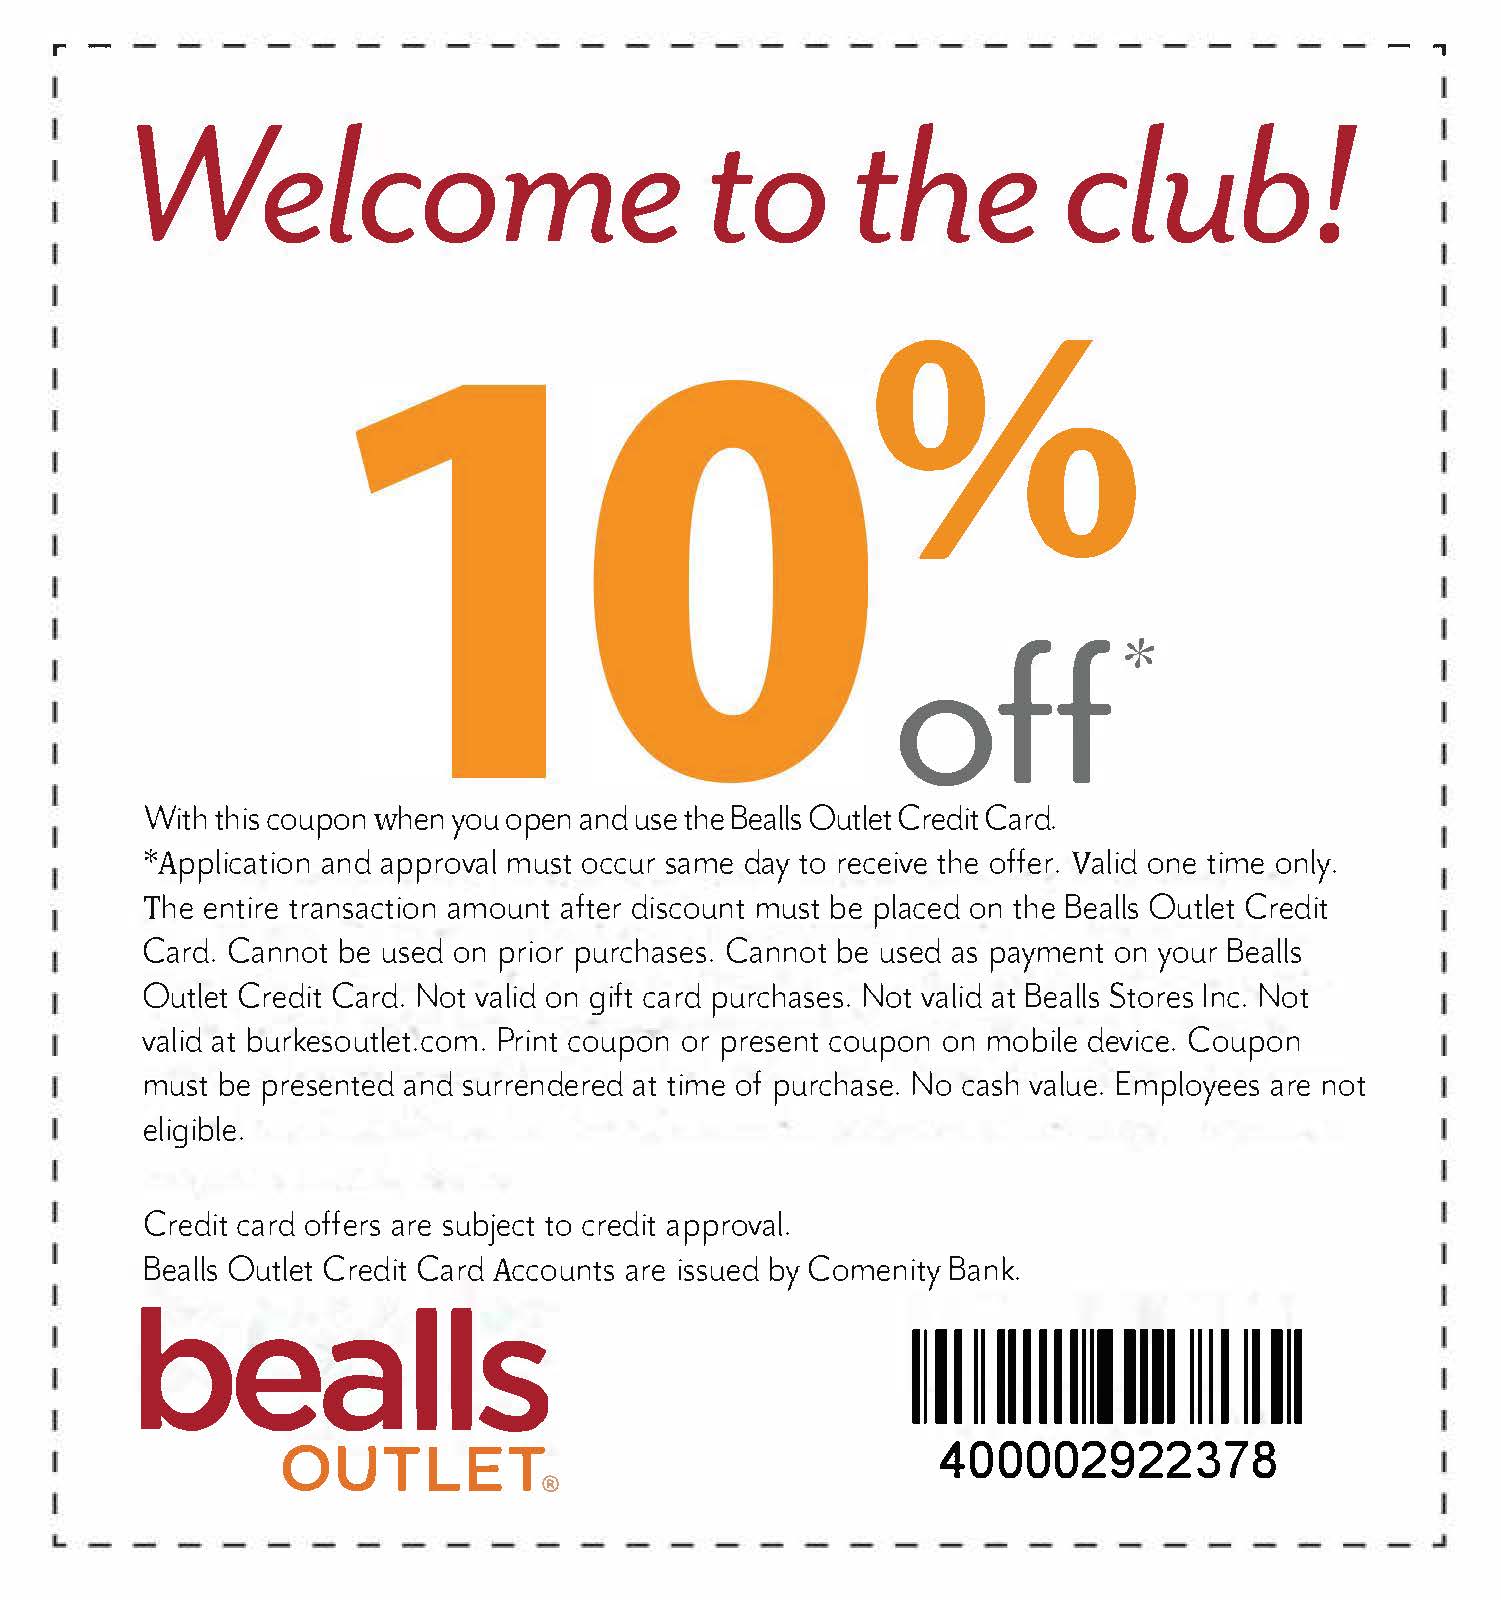 Welcome to the club! 10% off with this coupon. (disclosure at bottom of coupon)